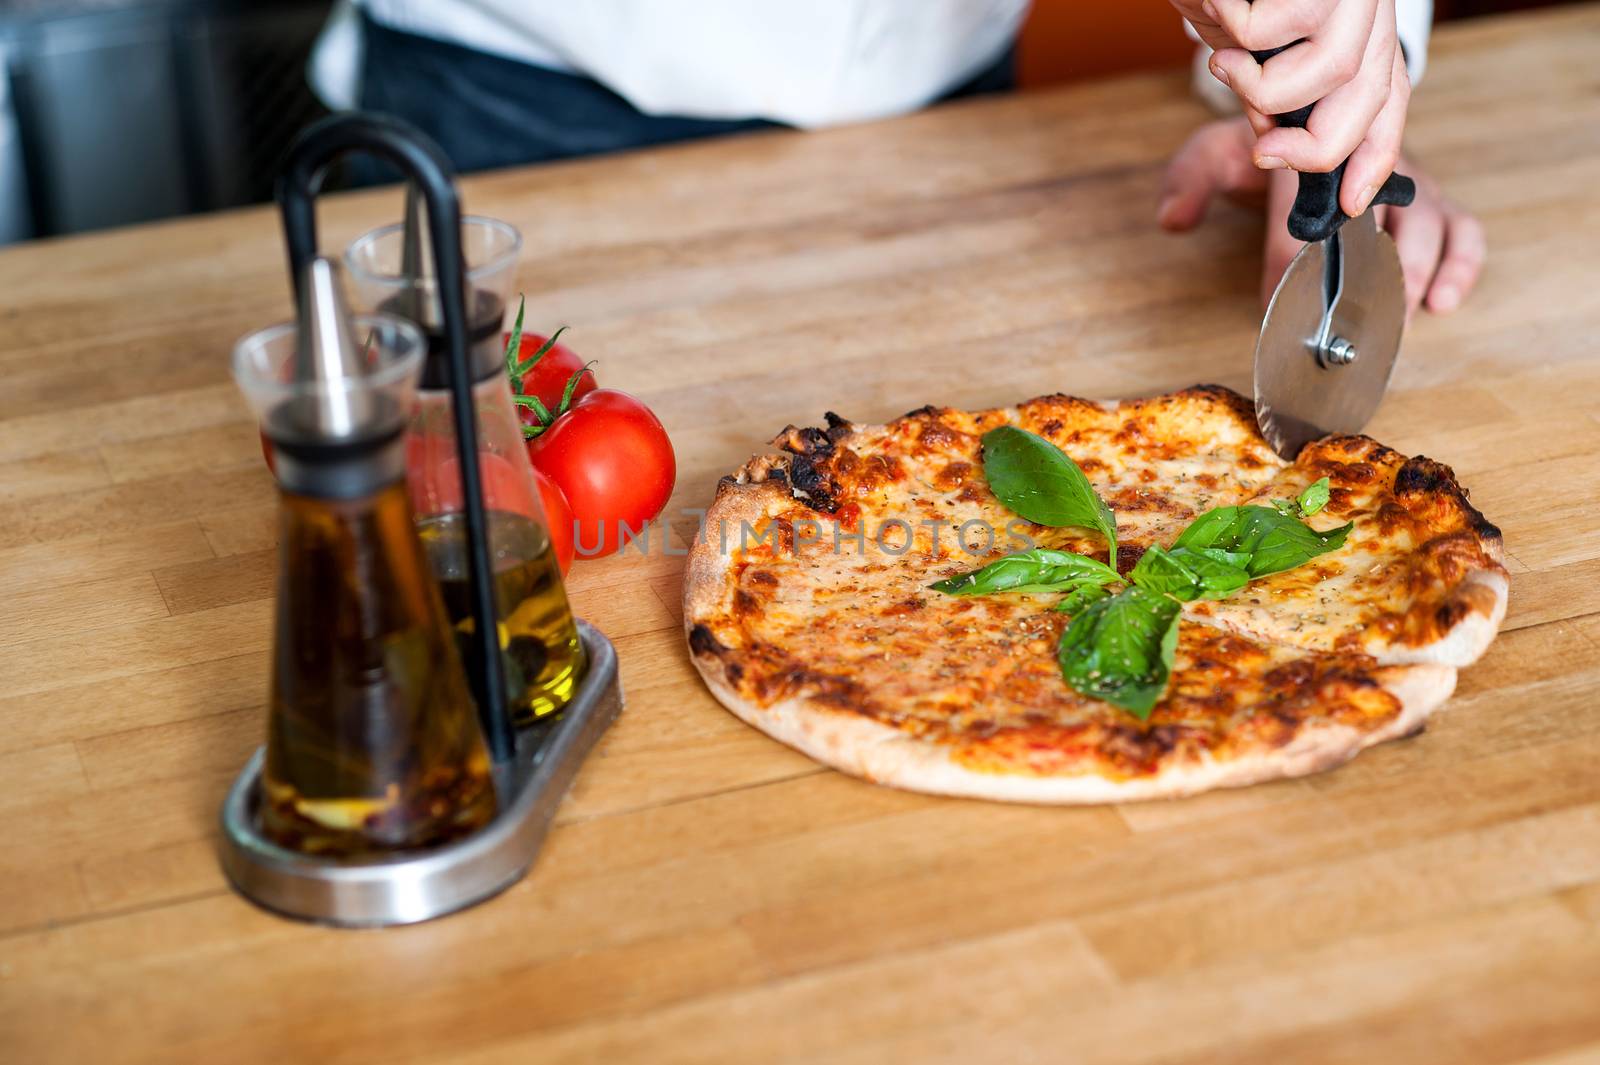 Baker cutting pizza at kitchen by stockyimages